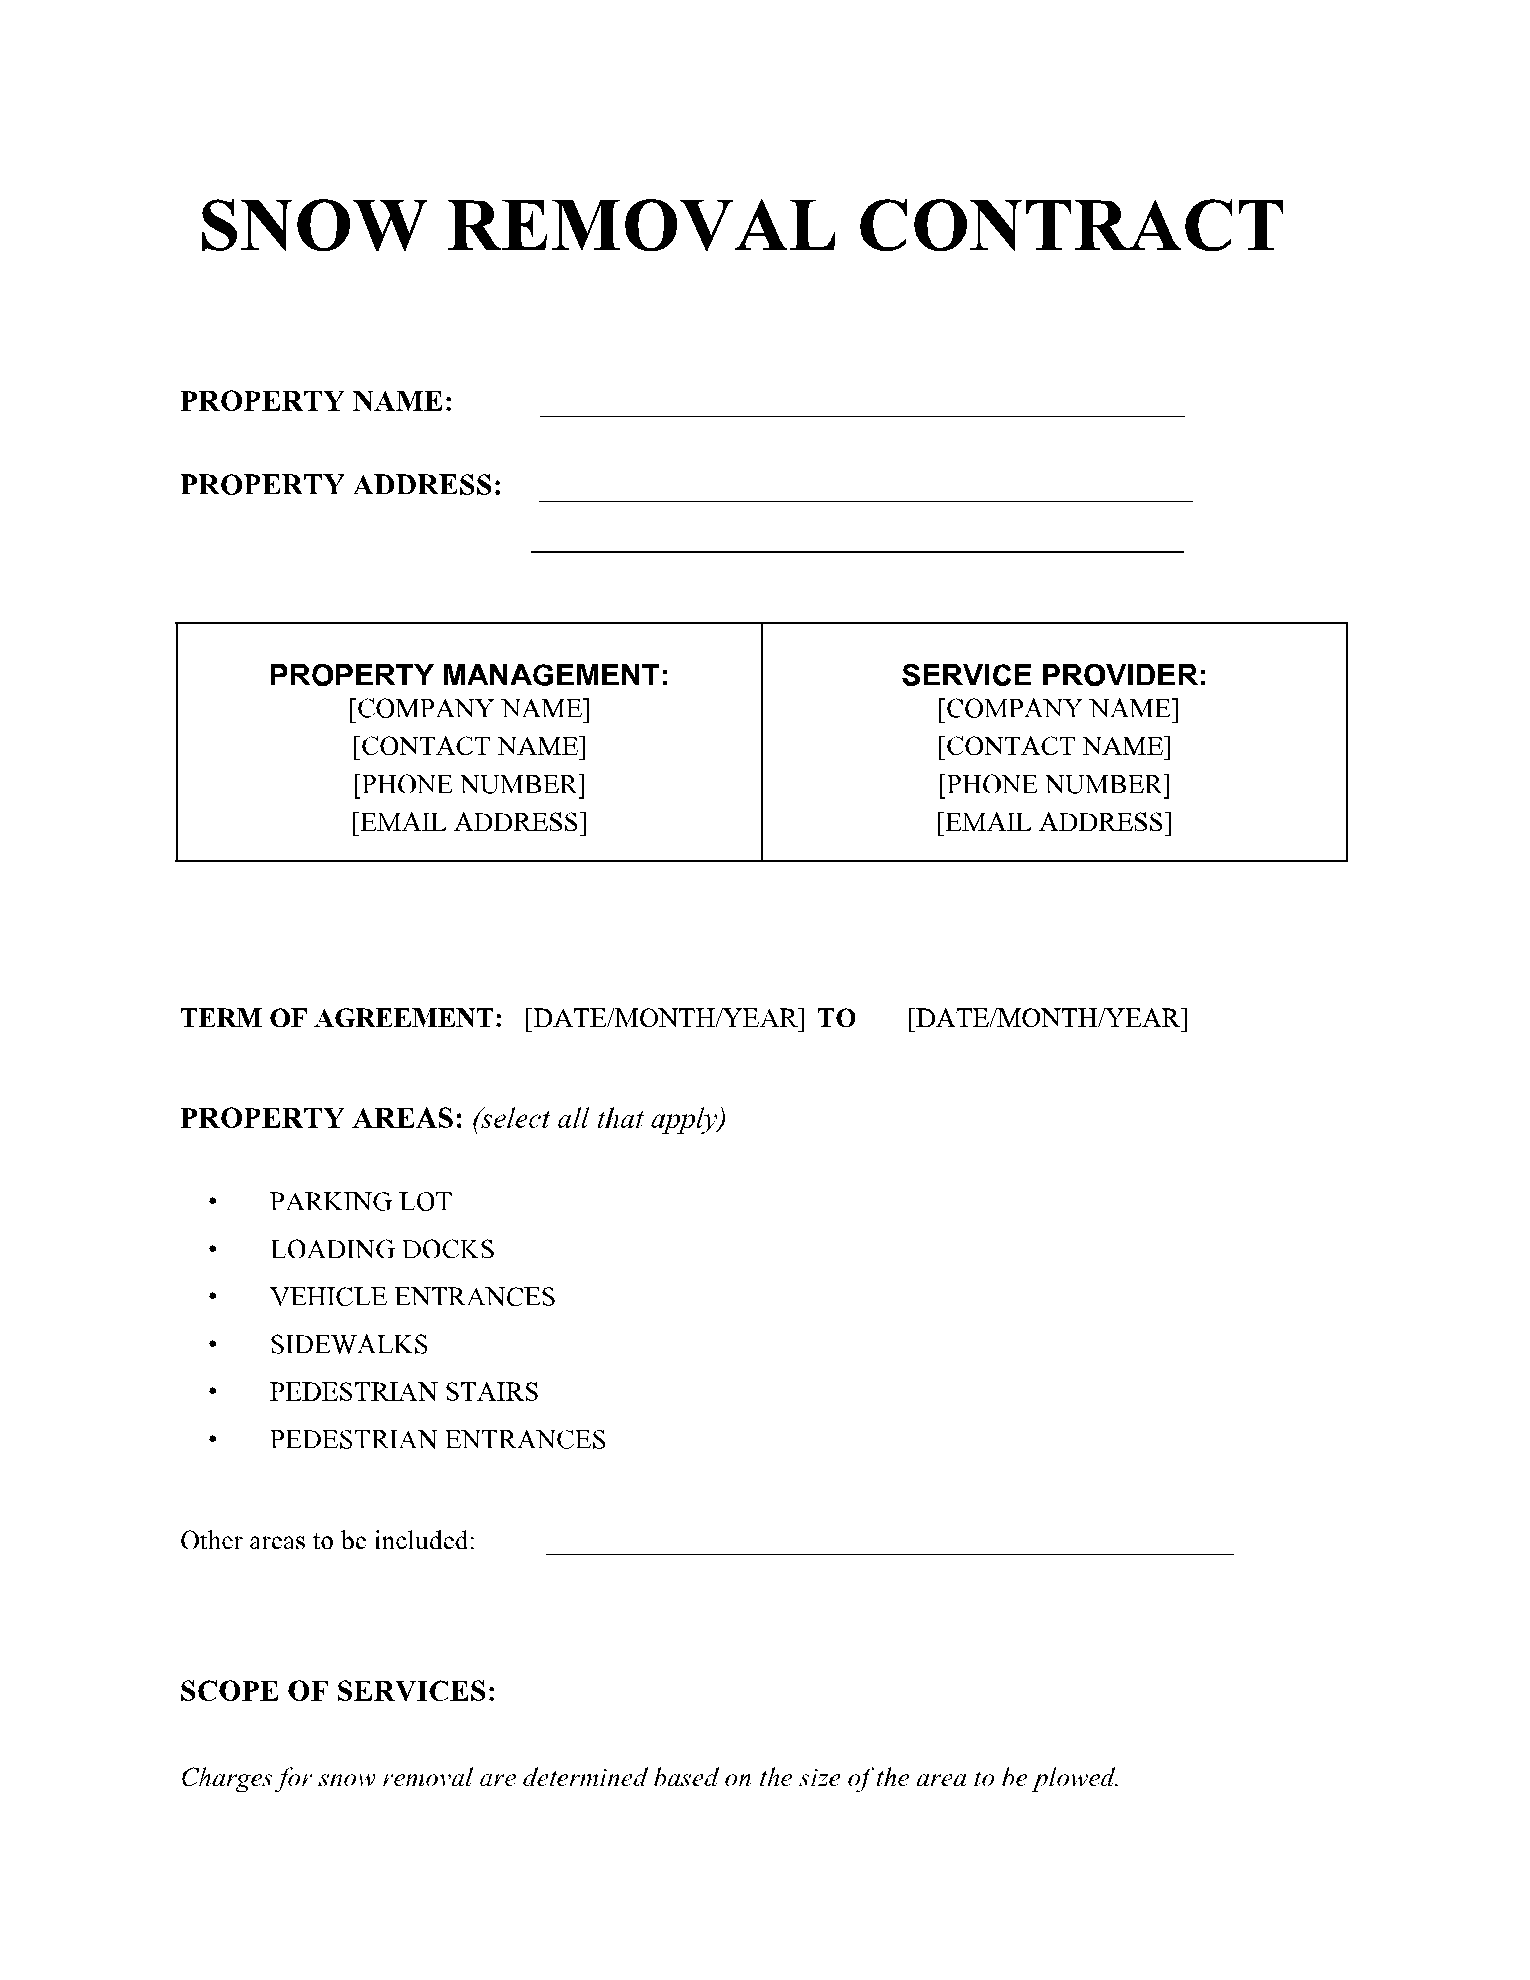 Snow Removal Contract